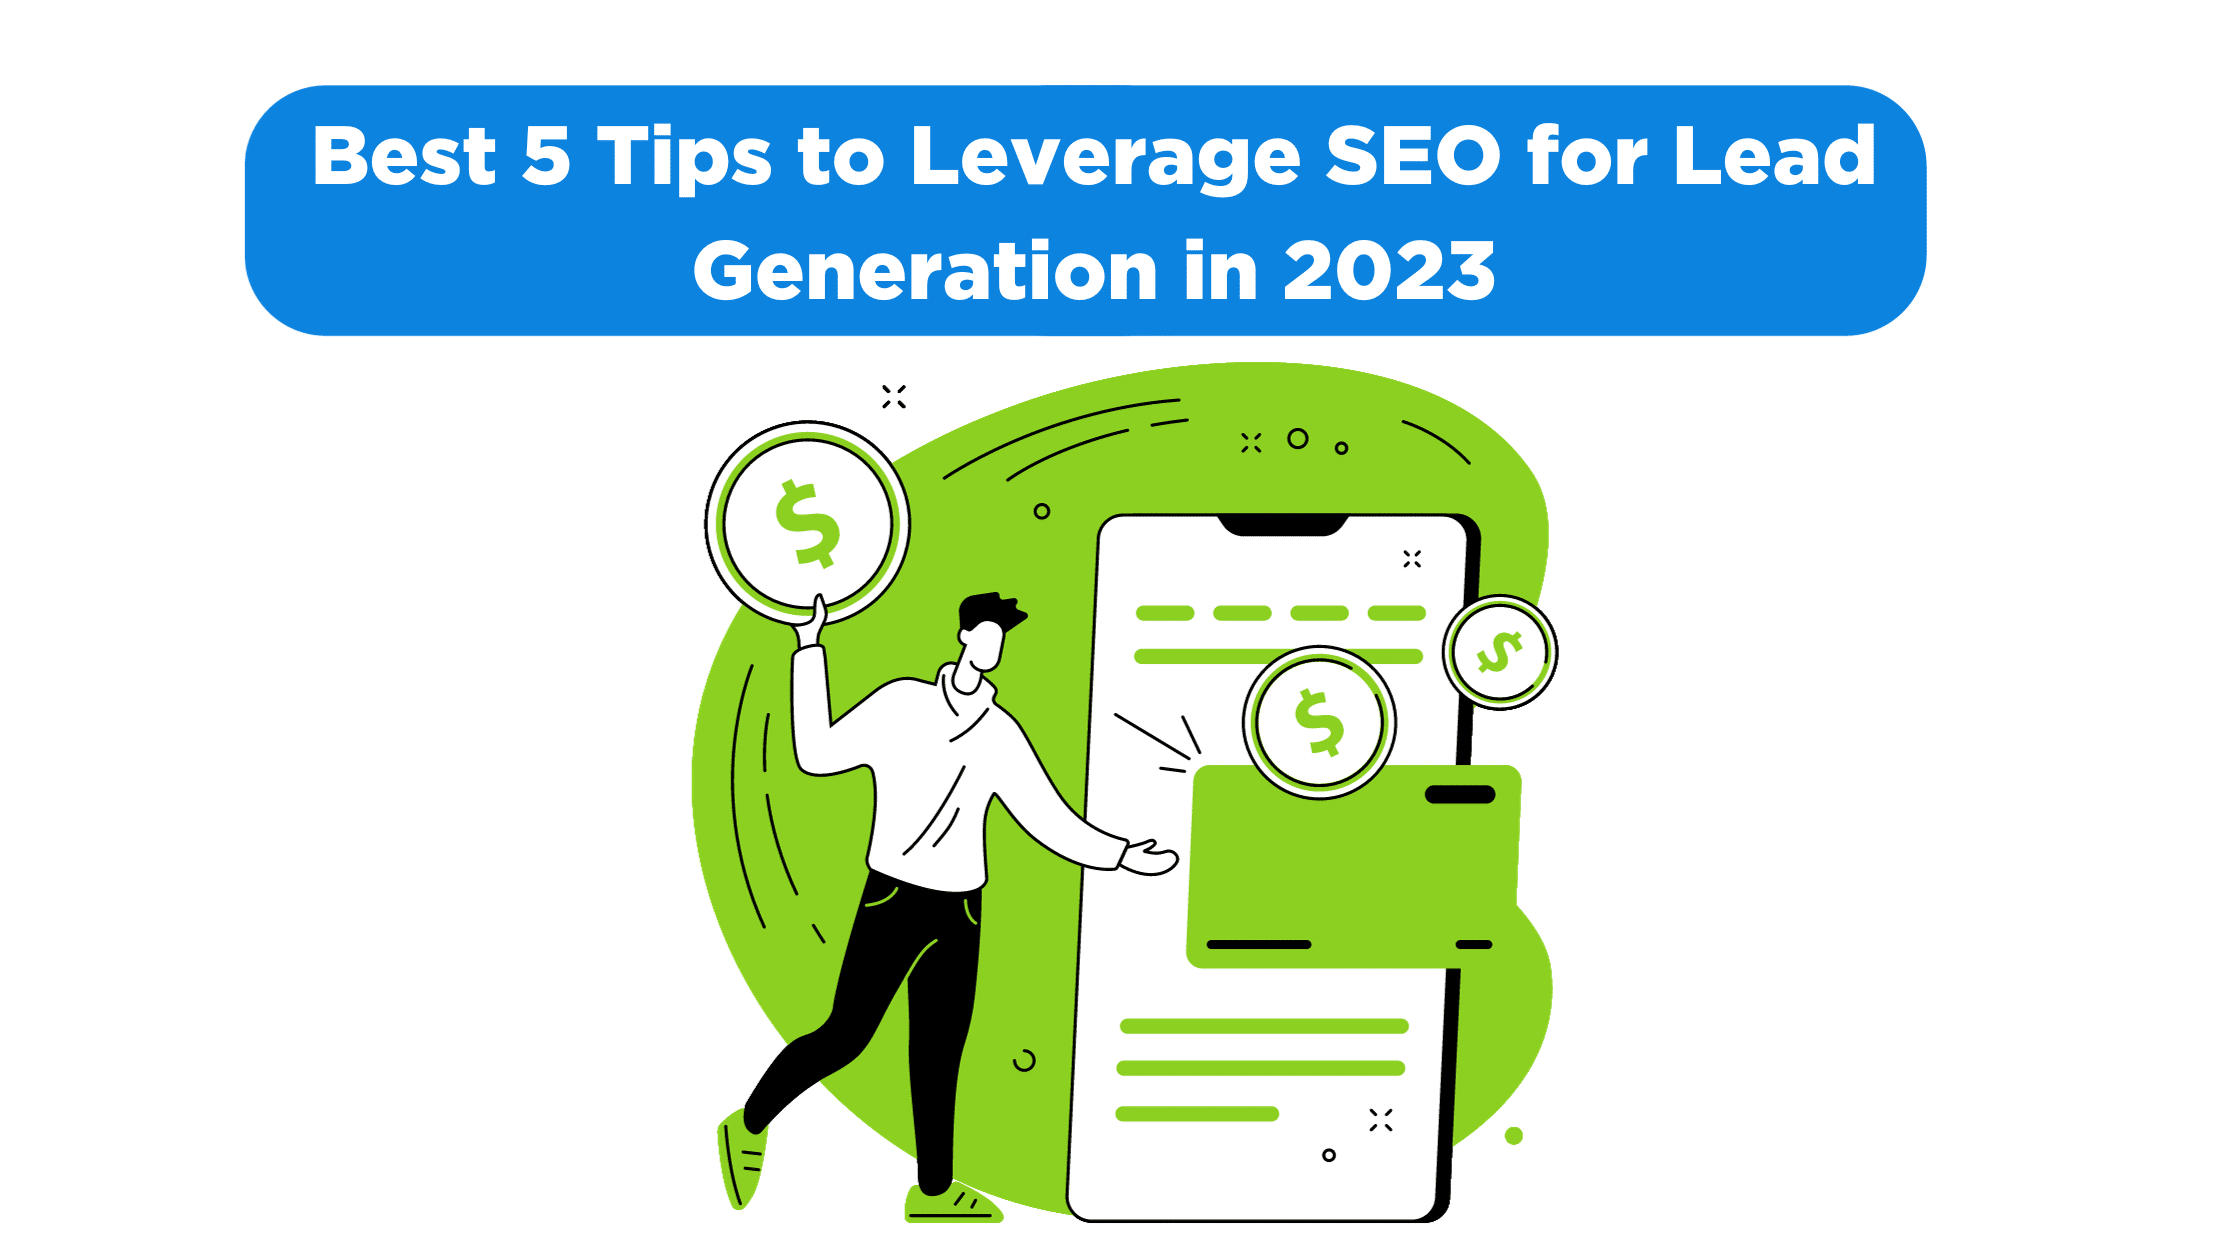 Best 5 Tips to Leverage SEO for Lead Generation in 2023